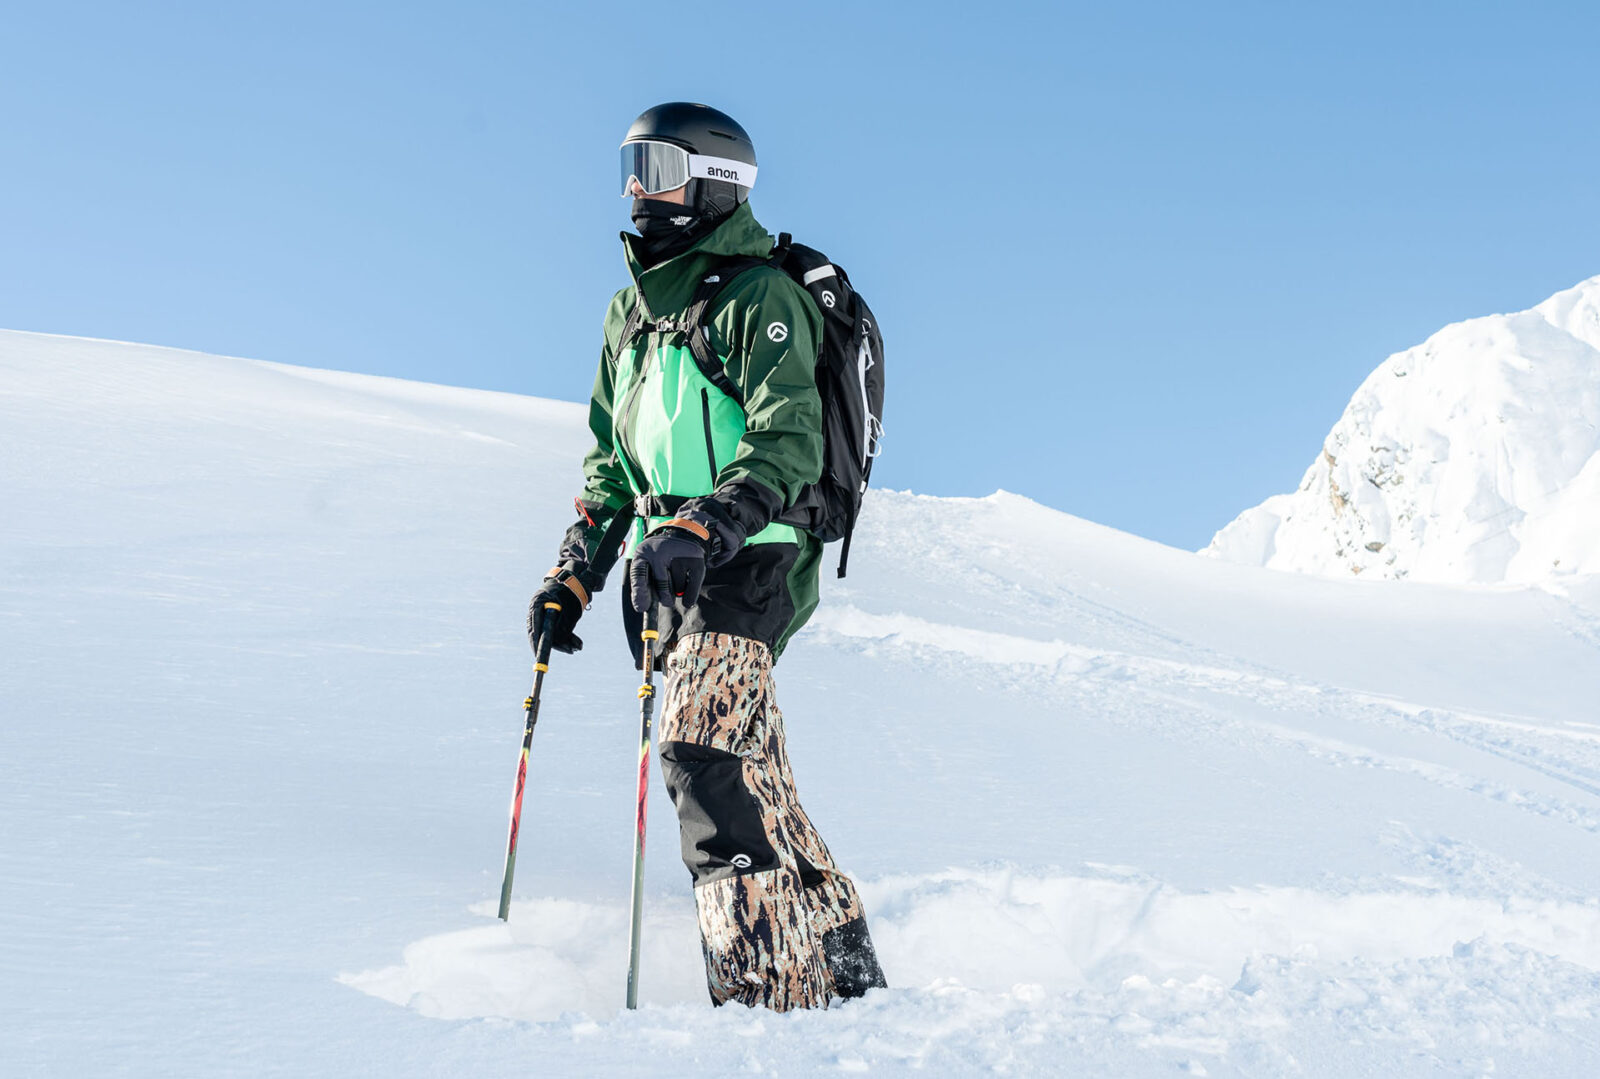 Tested: The North Face Summit Verbier Jacket & Pants